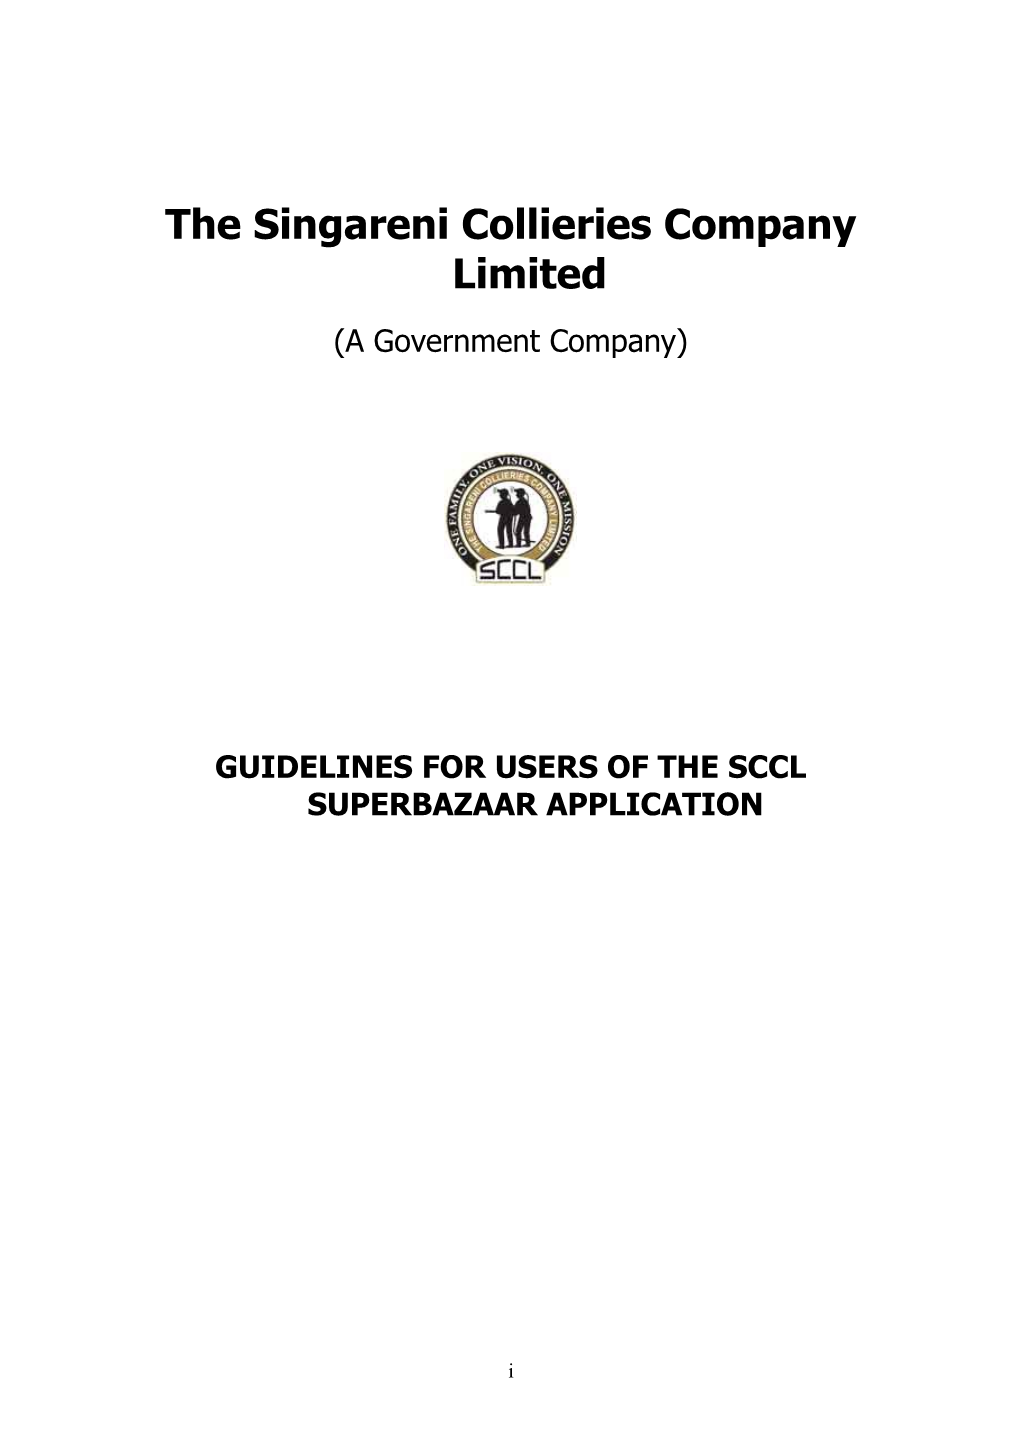 The Singareni Collieries Company Limited s1